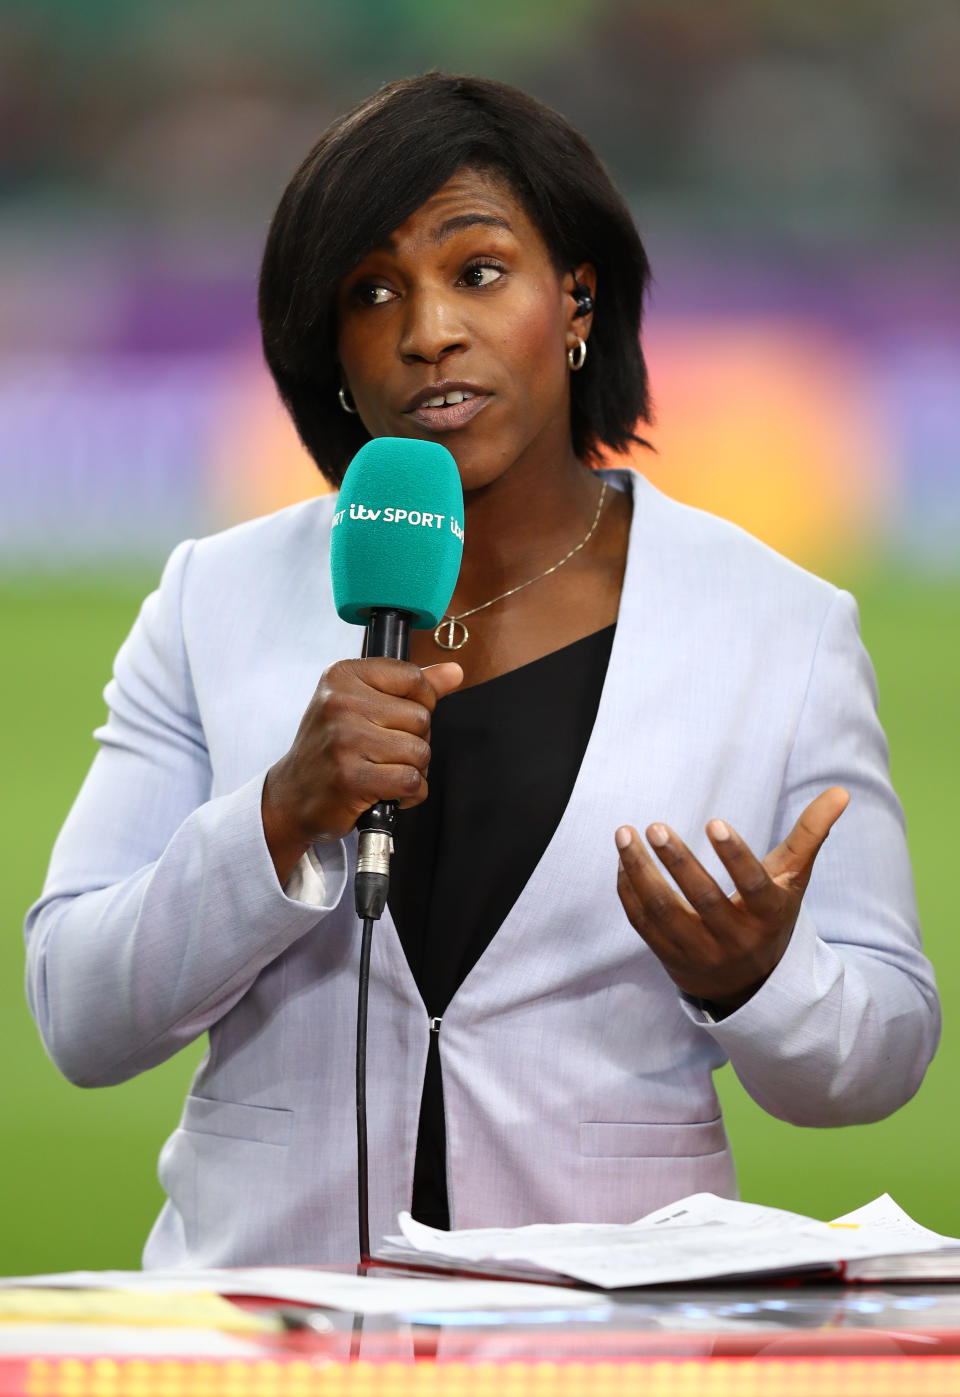 OITA, JAPAN - OCTOBER 20:  ITV  sport rugby presenter Maggie Alphonsi during the Rugby World Cup 2019 Quarter Final match between Wales and France at Oita Stadium on October 20, 2019 in Oita, Japan. (Photo by Michael Steele/Getty Images)